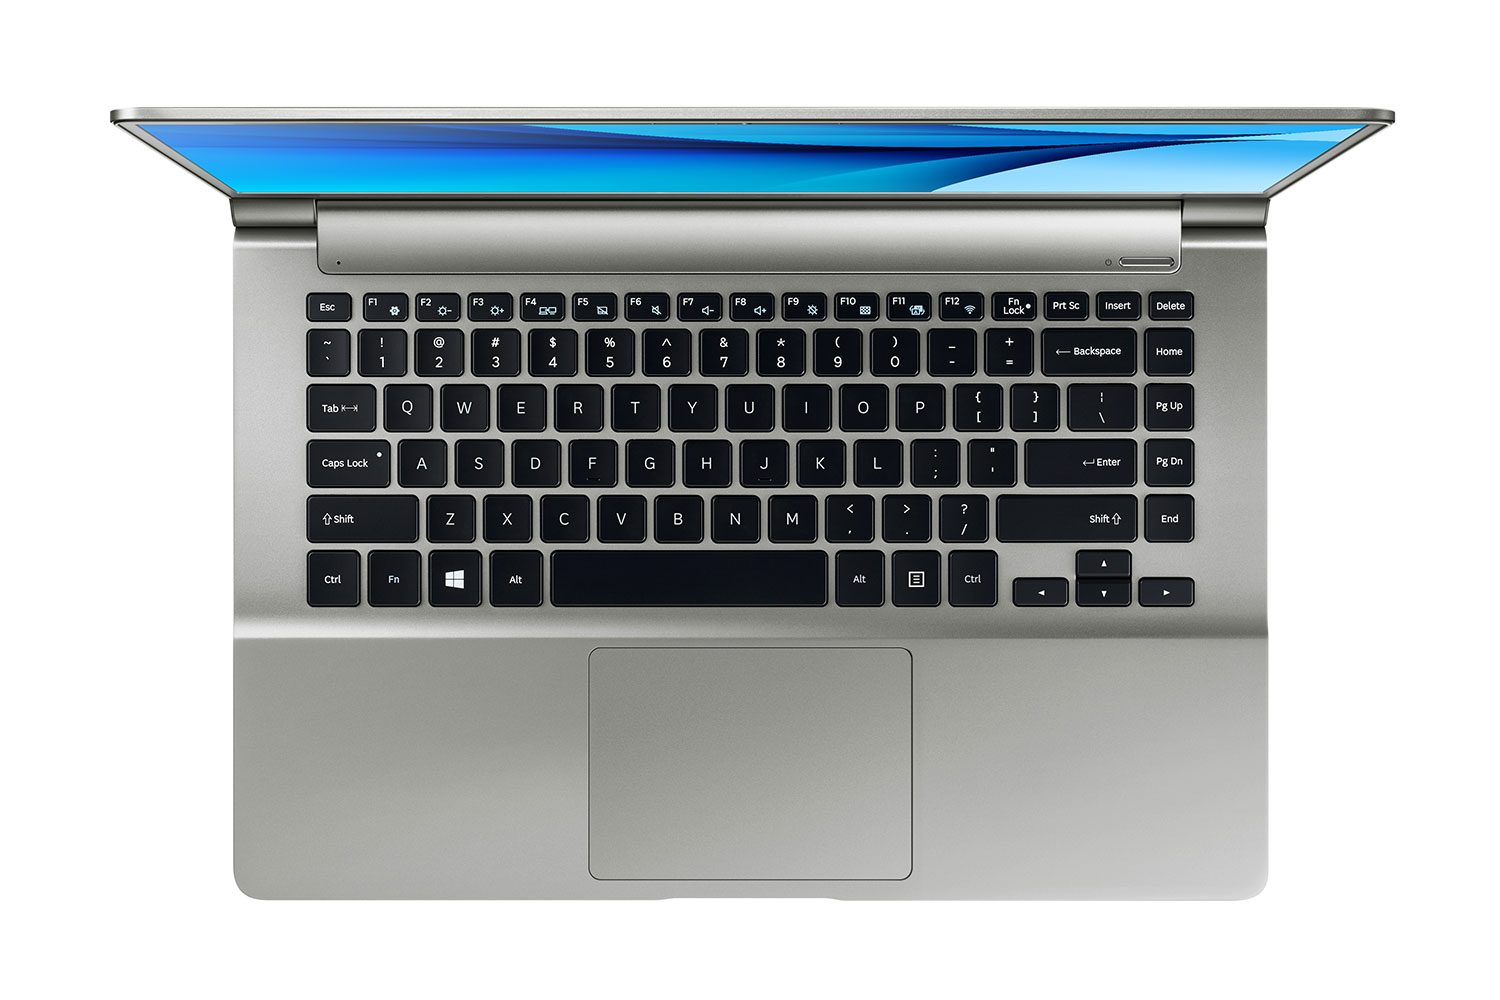 samsung debuts new galaxy tabpro s 2 in 1 book 9 laptops at ces 2016 15 23